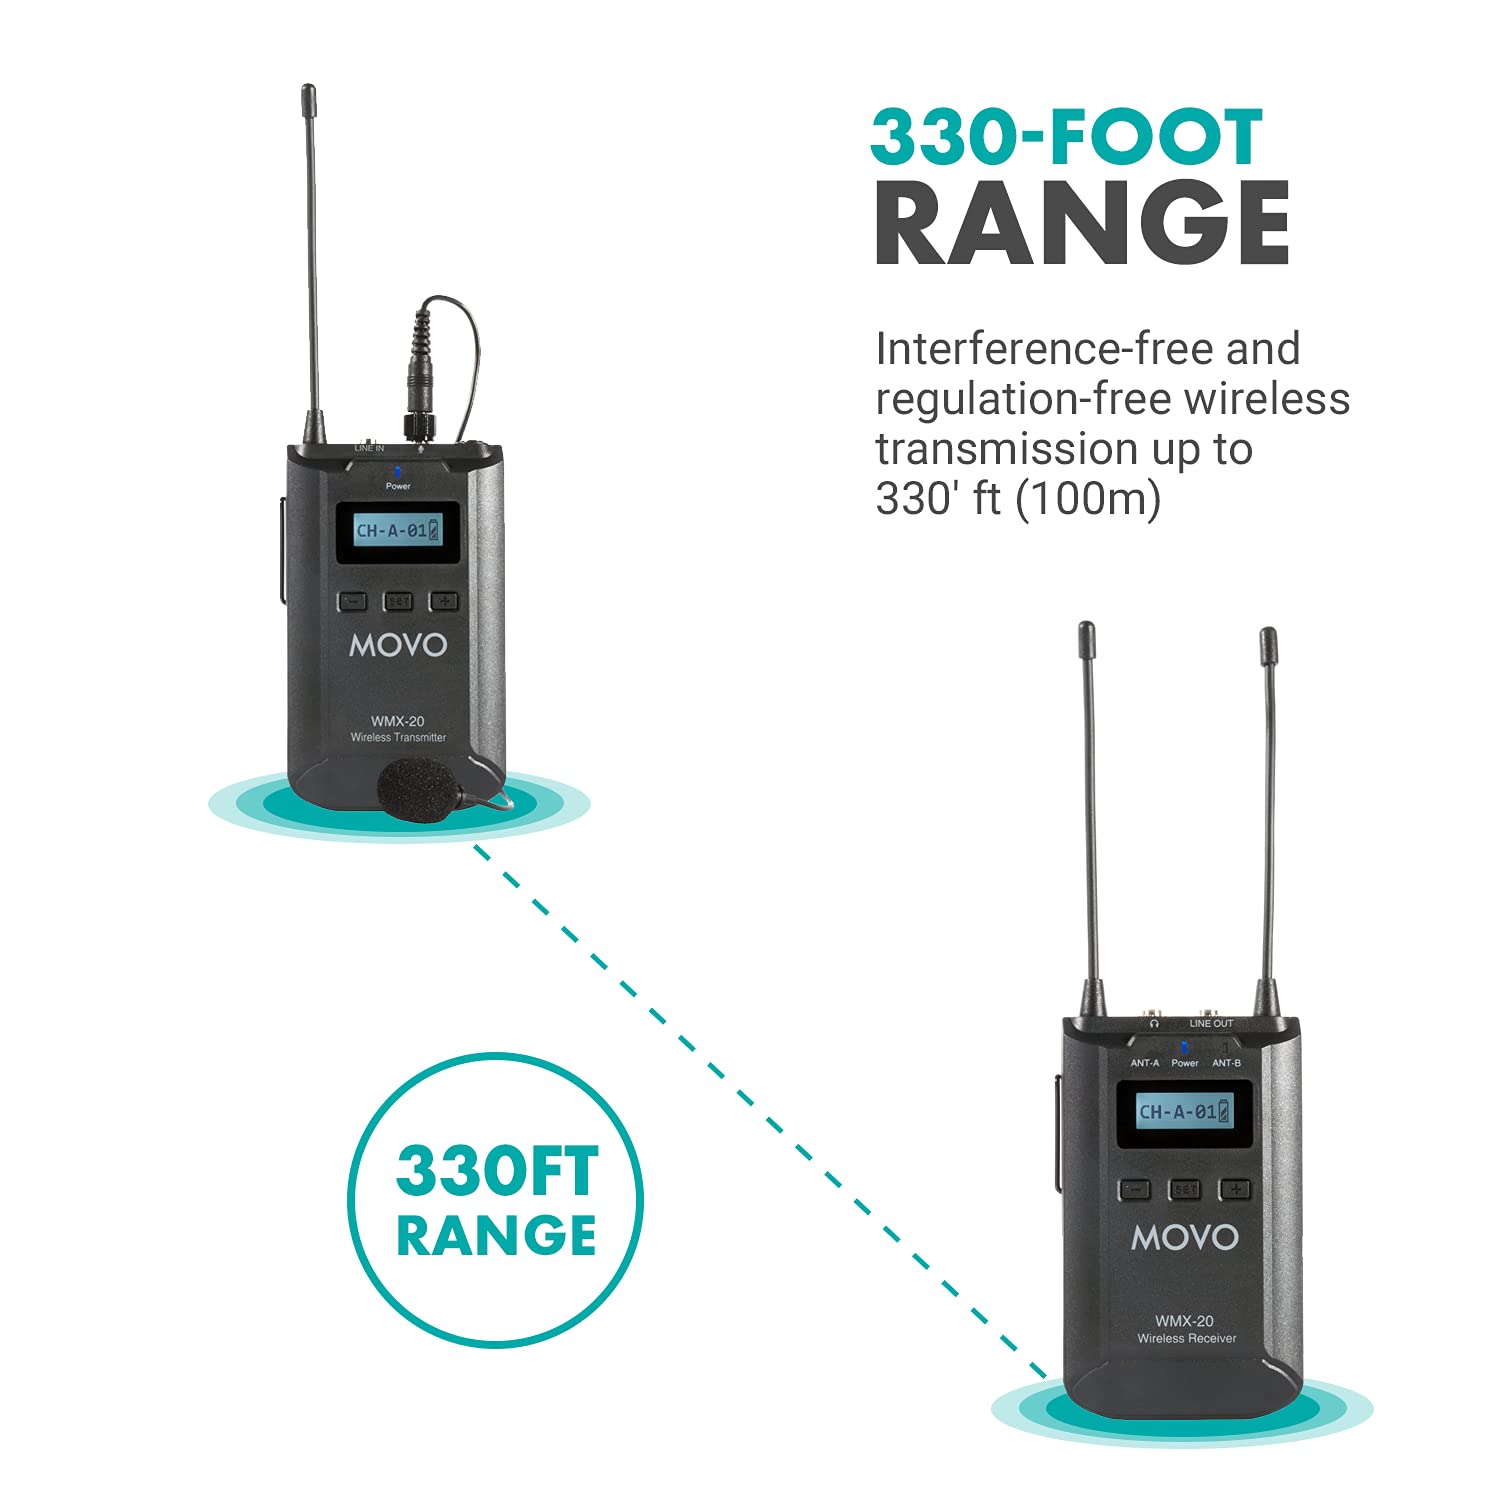 Movo WMX-20-RX Receiver for Wireless Lavalier Microphone System - For WMX-20 UHF Wireless Microphone System - Pairs w/ 2x Lapel Microphone Wireless Transmitters - Headphone Monitoring for Wireless Mic  - Like New